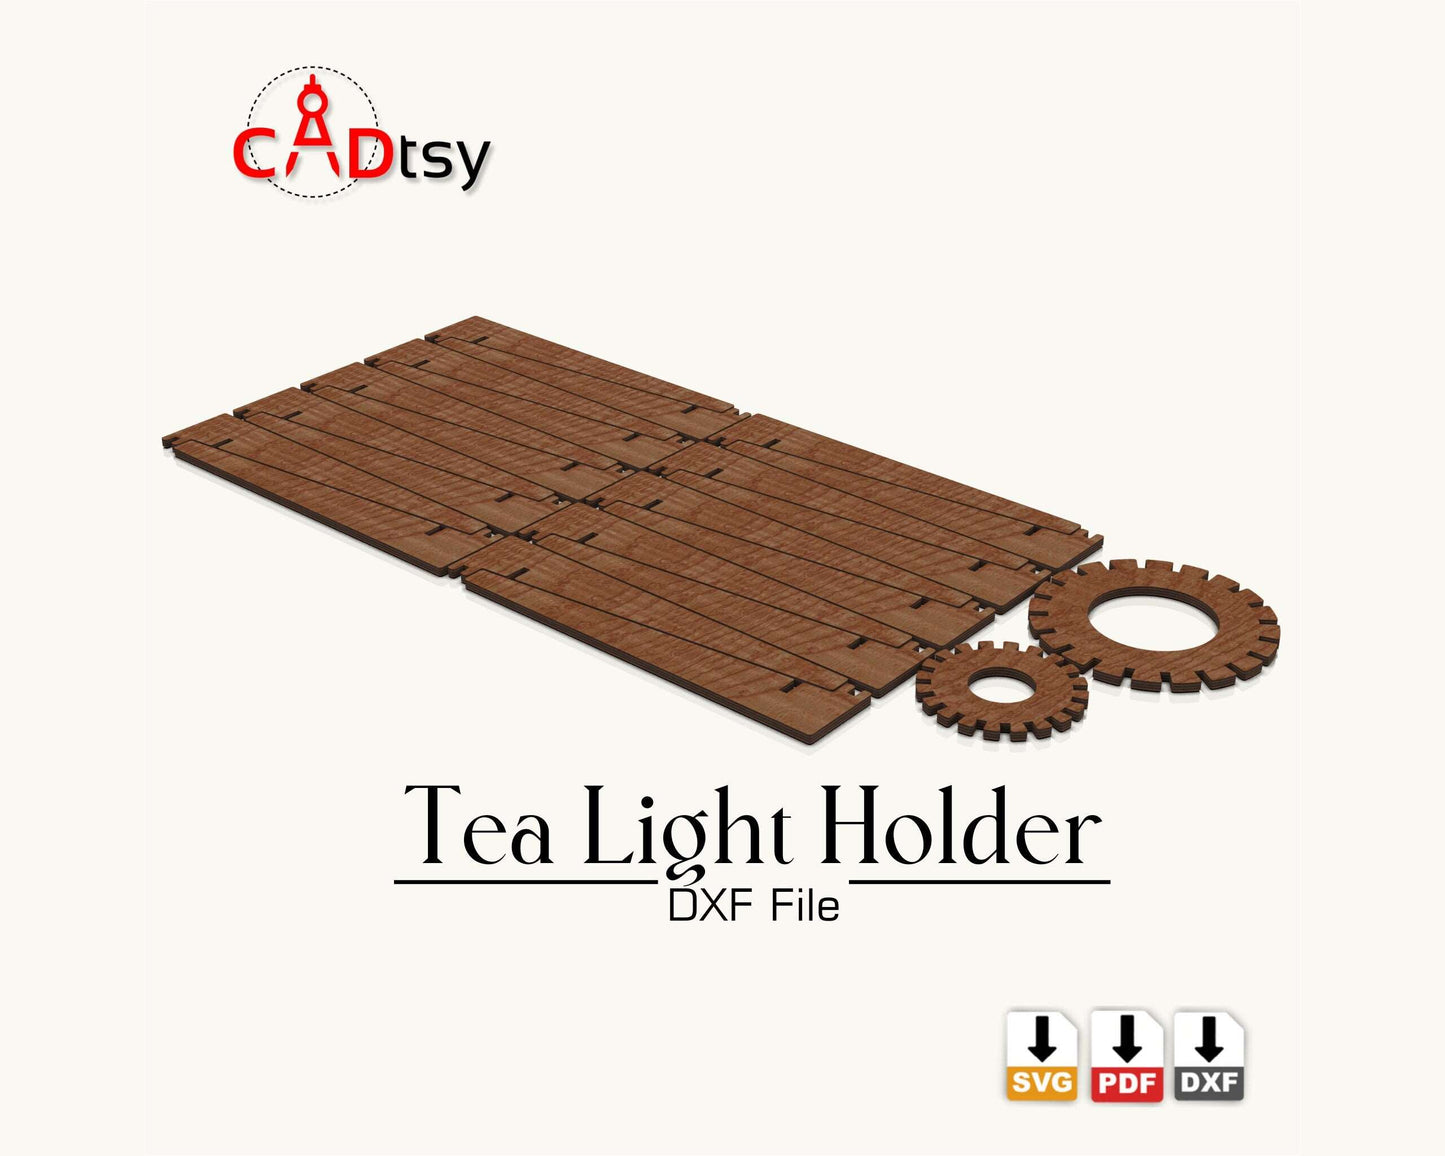 CADtsy Tea Light Candle Holder parts. Laser cut wooden brown plywood candlestick Lamp. Cylinder-shaped decor for a cozy home interior